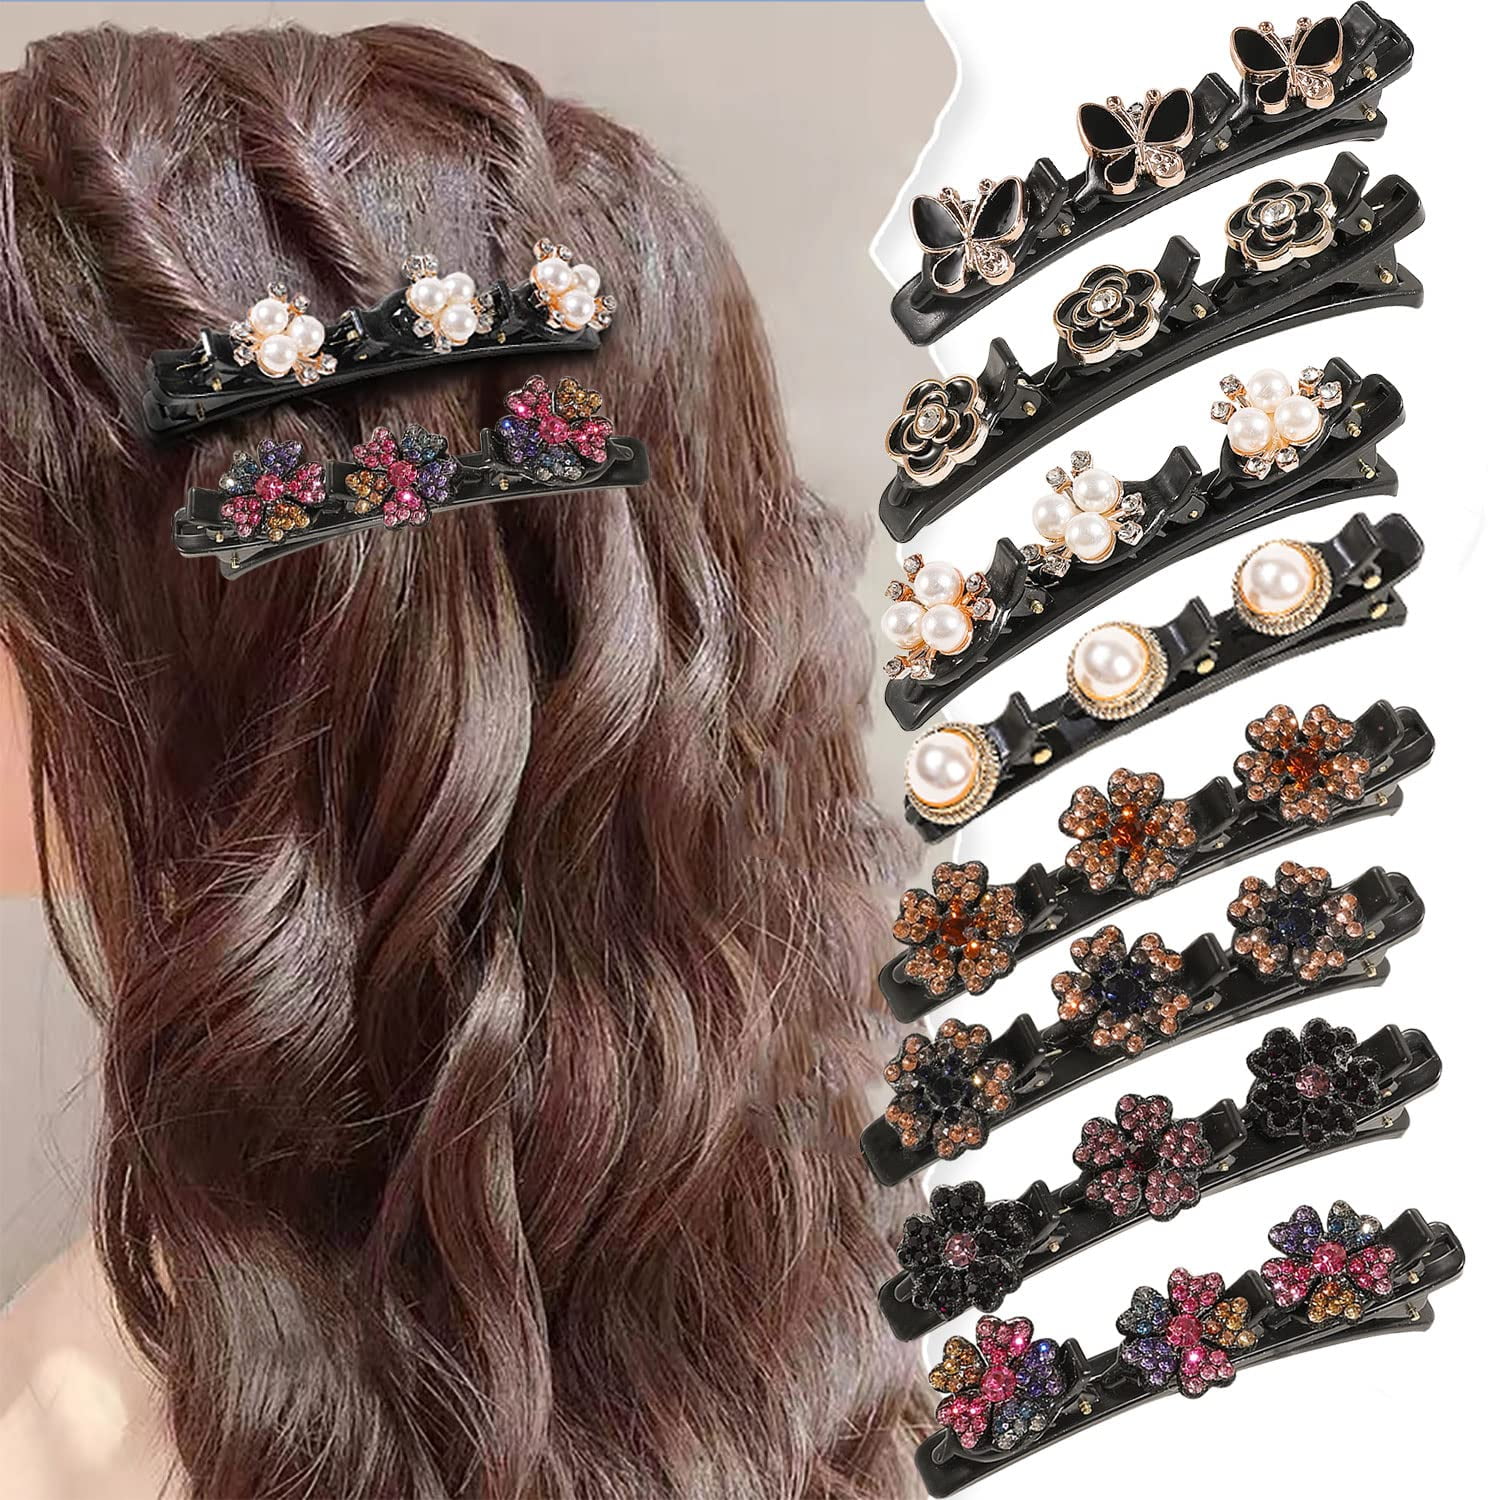 Pompotops Braided Hair Clips with 3 Small Clips for Women Girls Cute Pearl  Braided Hair Barrettes Hair Accessories 